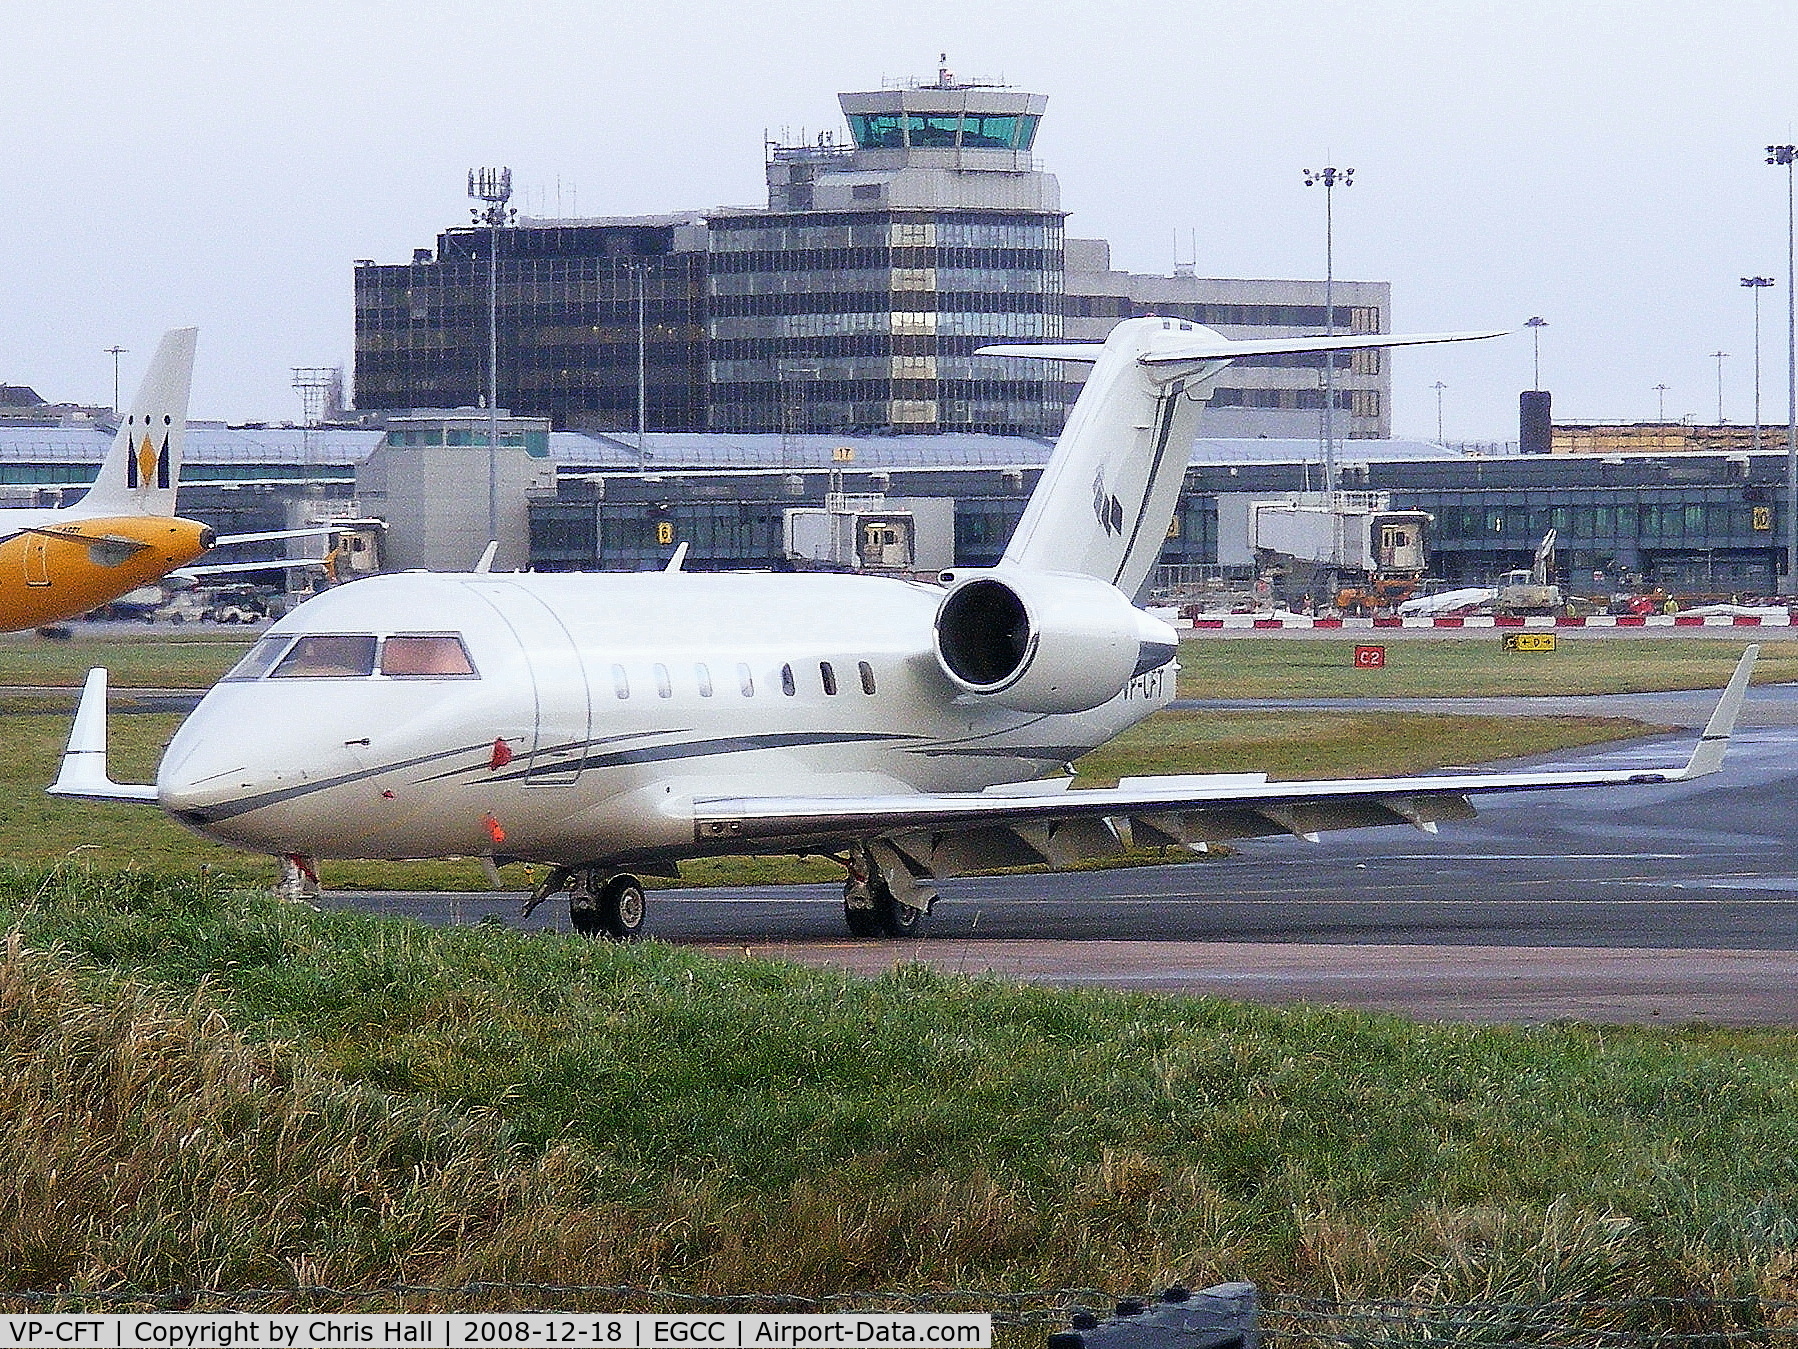 VP-CFT, 1990 Canadair Challenger 601-3A (CL-600-2B16) C/N 5067, Meral Holdings